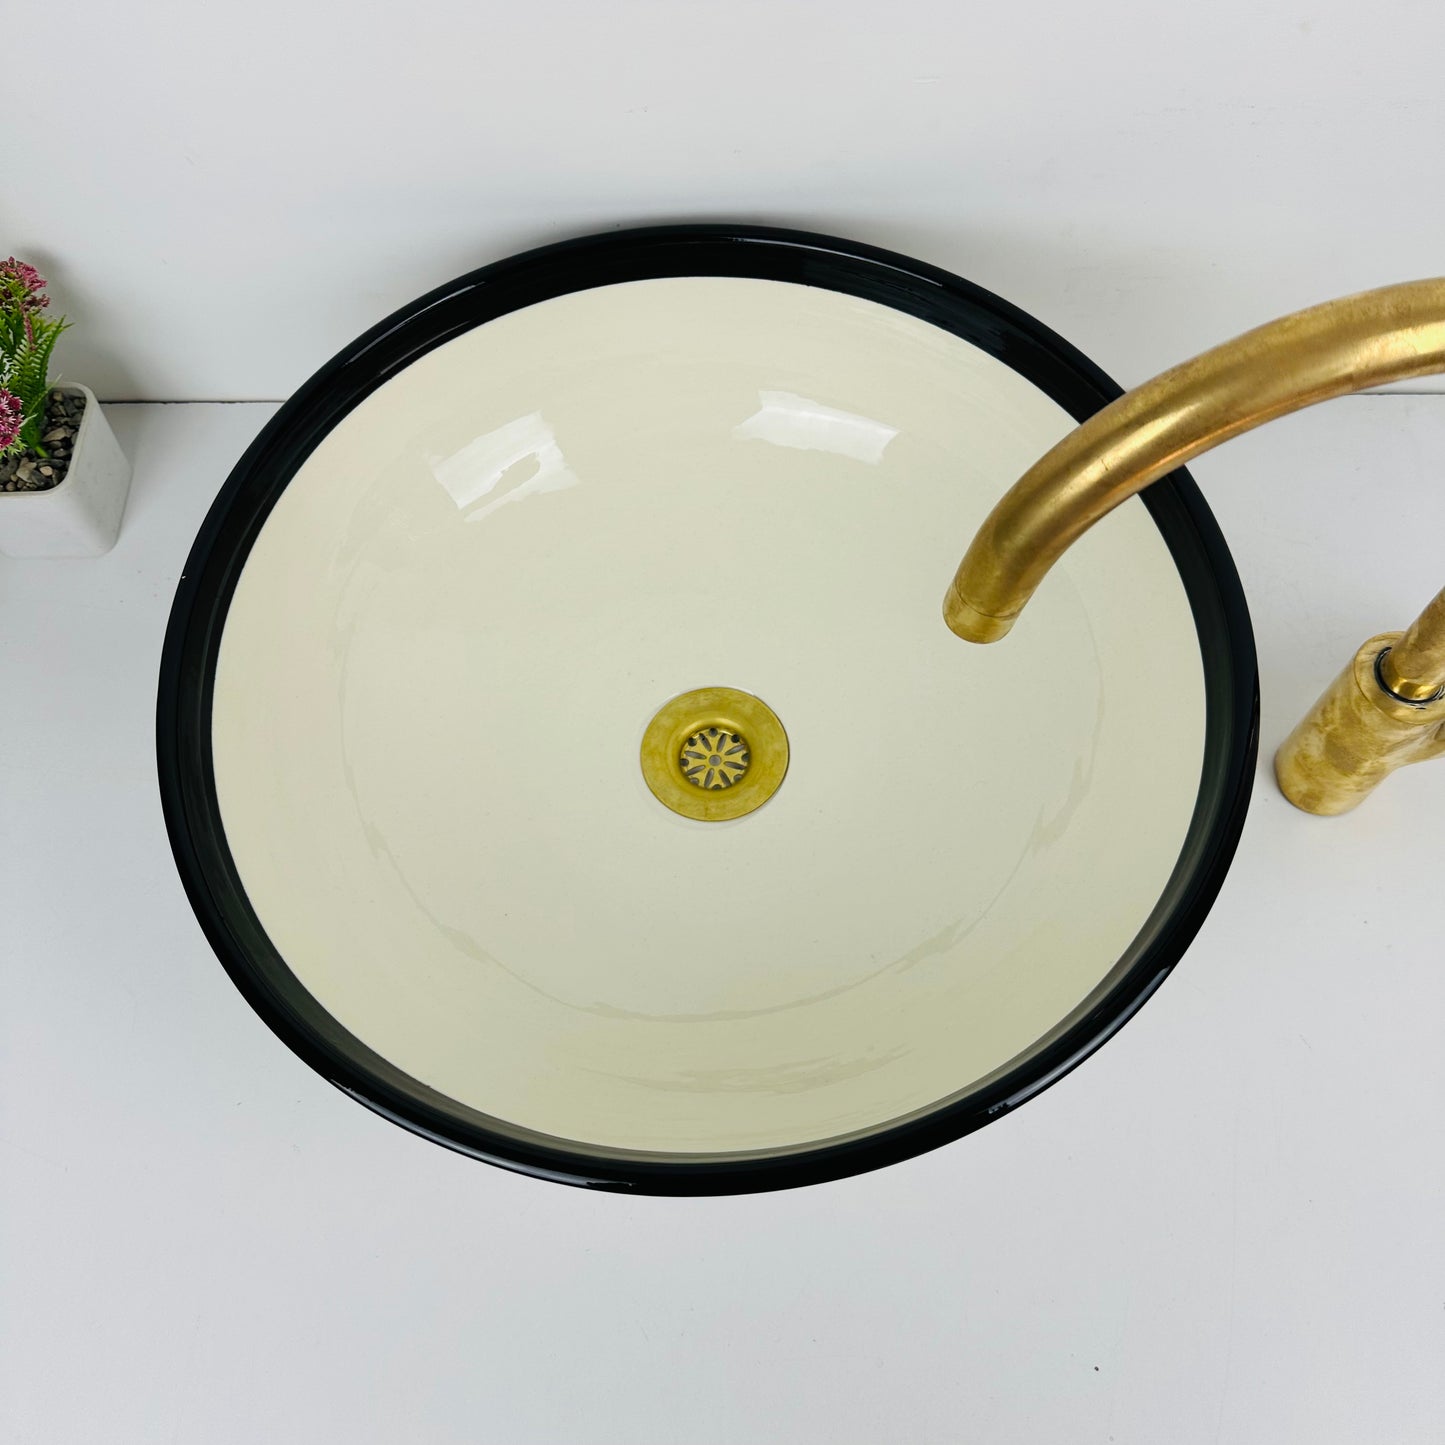 Round Elegance: Handcrafted Ceramic Sink with Black Top Finish